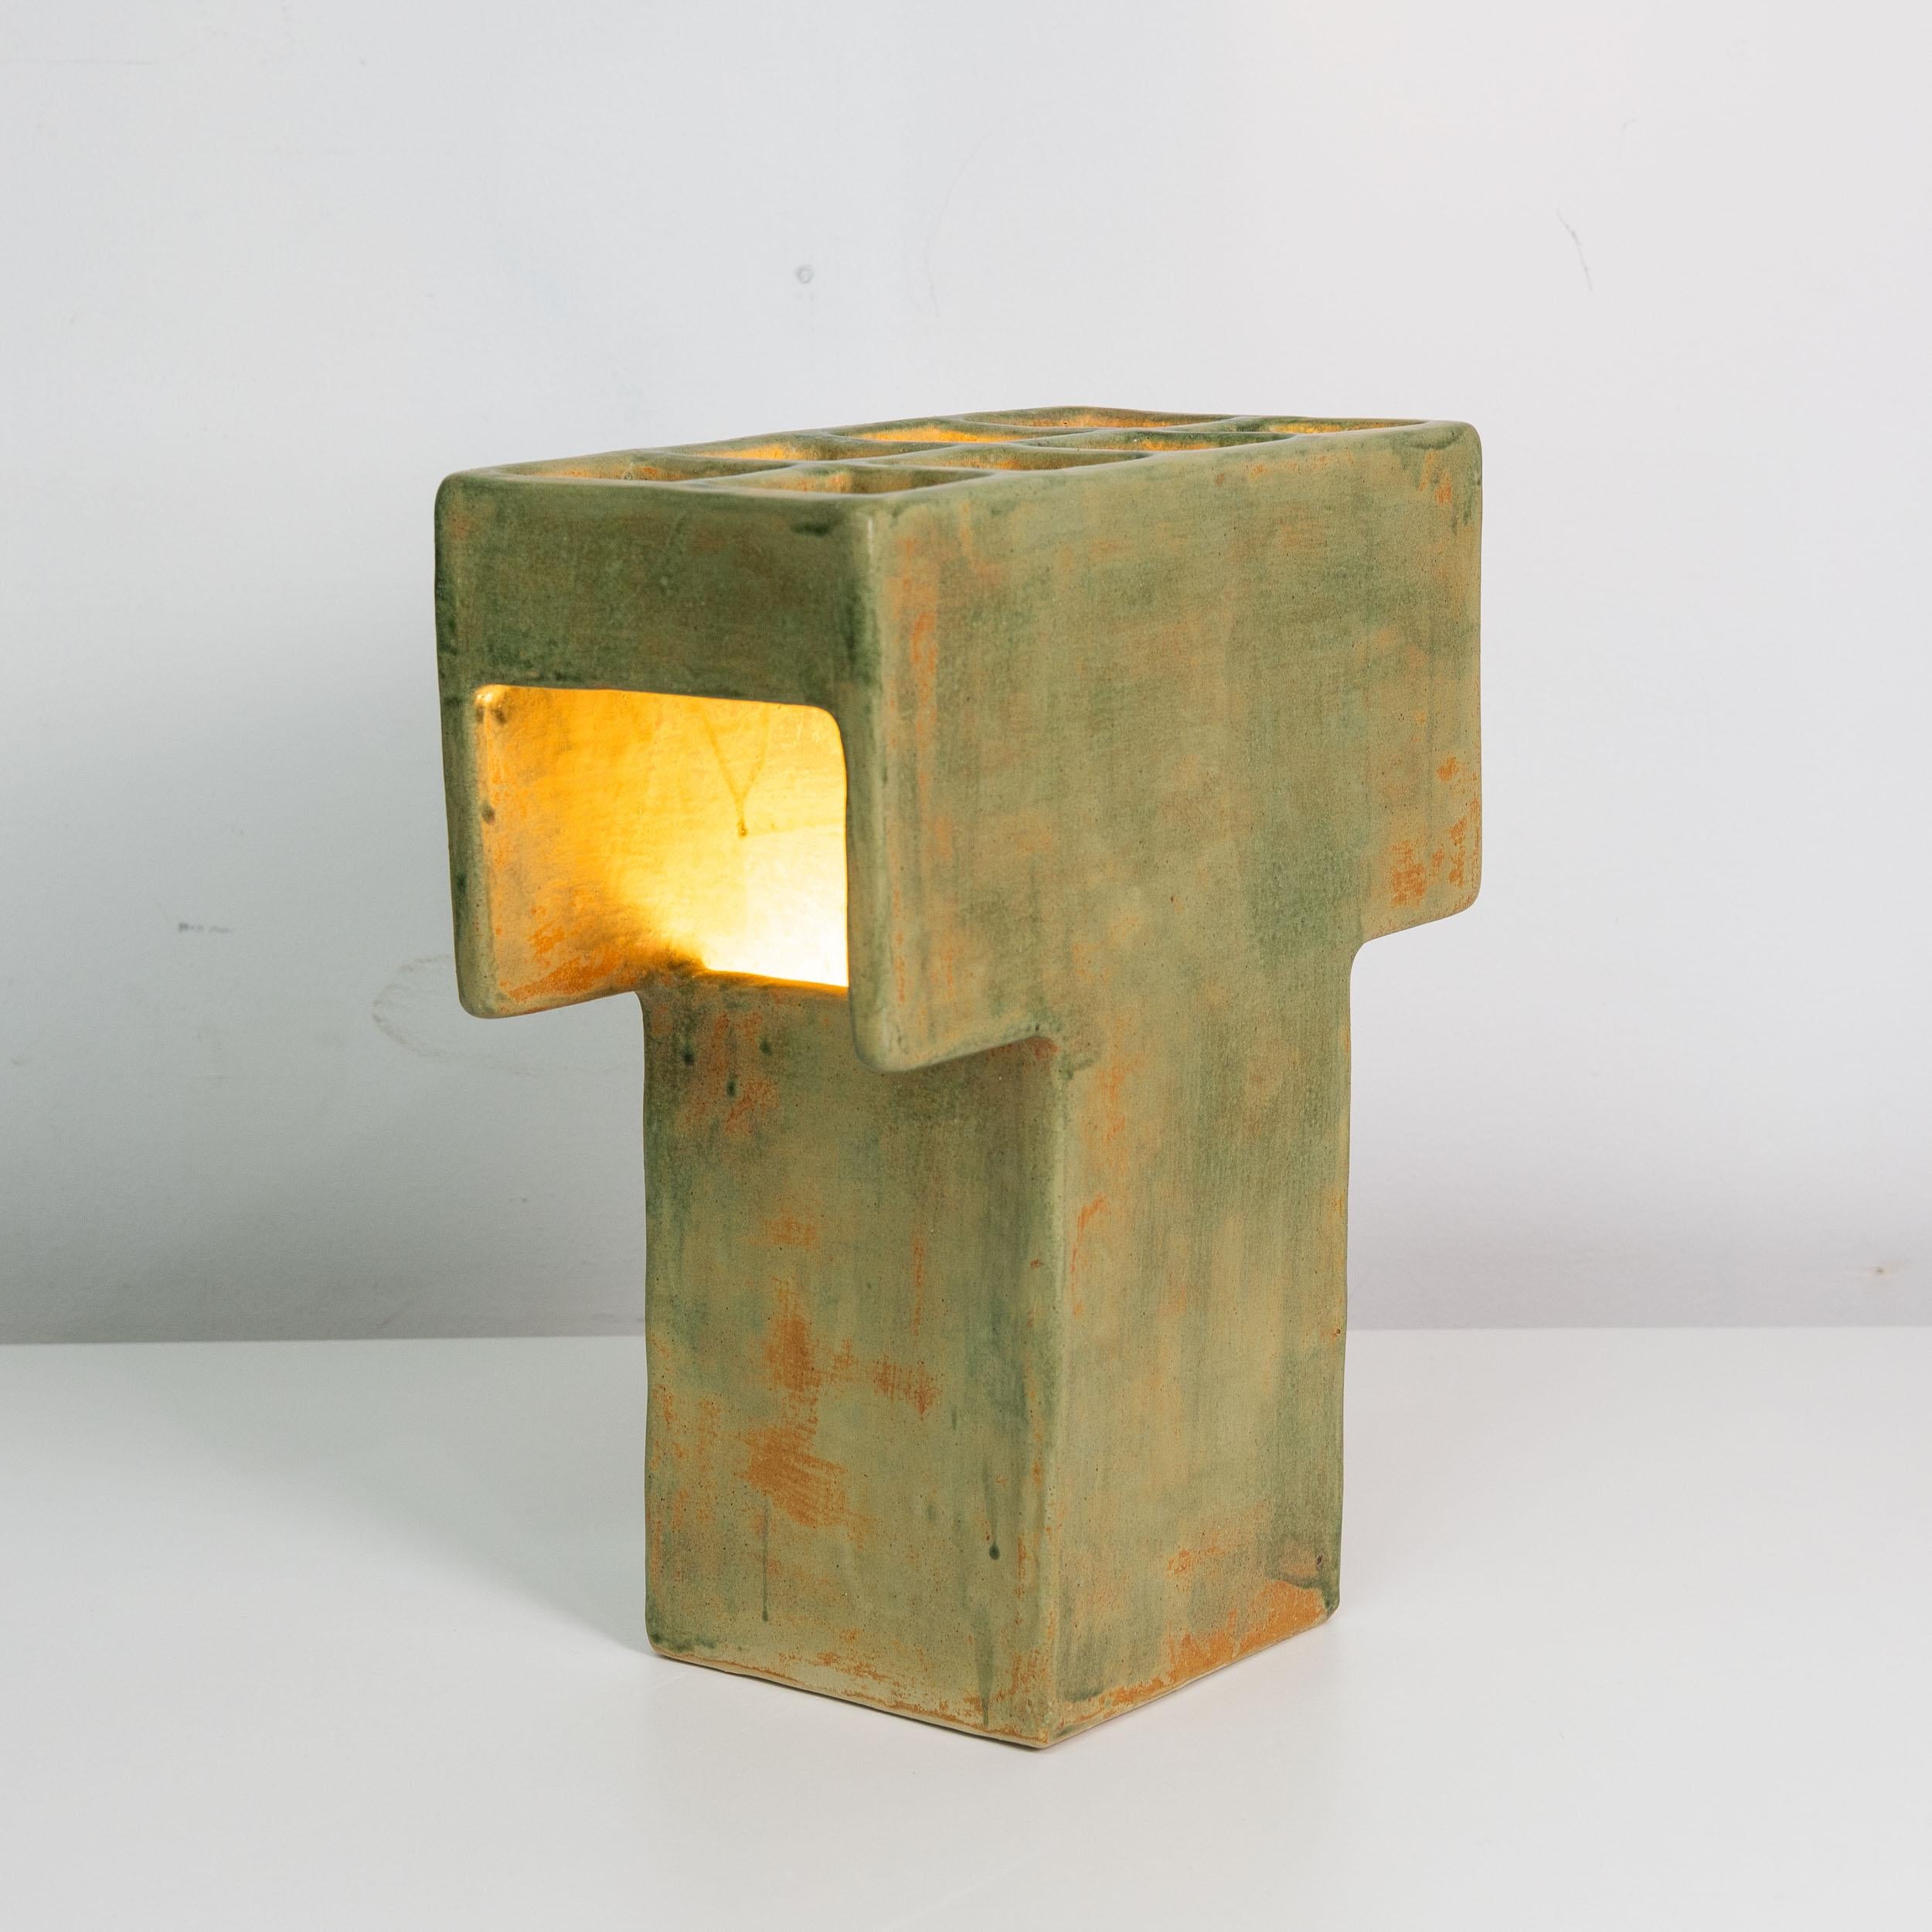 Mr. T Ceramic Table Lamp, Geometric, Brutalist, Square Table Light, Clay, Glazed In New Condition For Sale In Brooklyn, NY